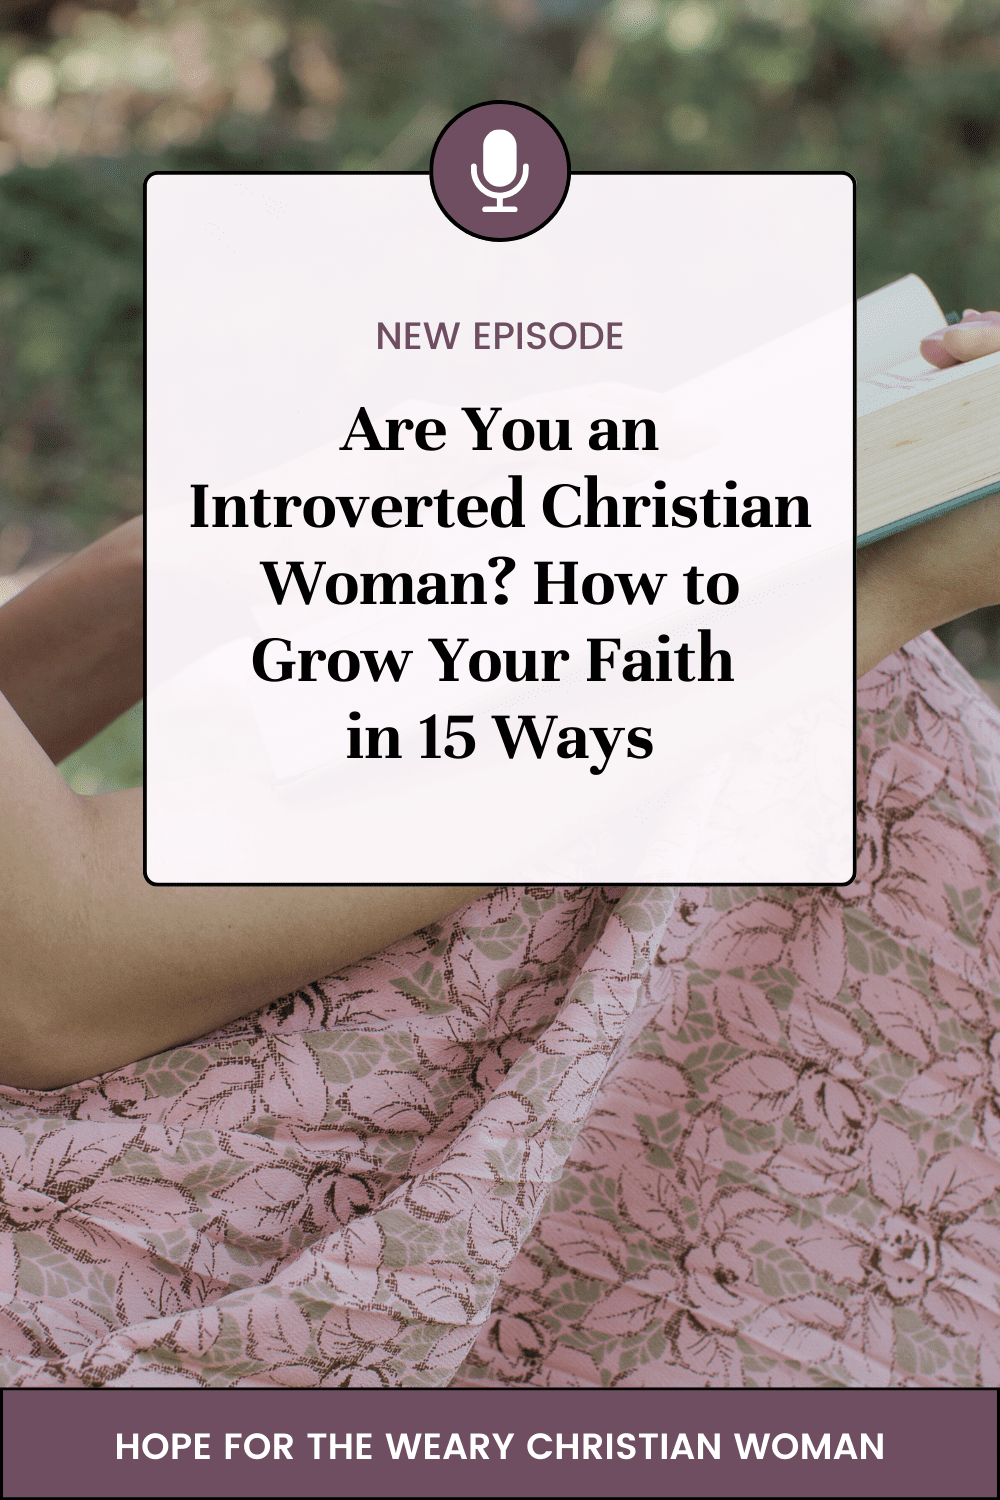 Unsure how to grow your faith as a highly sensitive introverted Christian woman? Learn 15 ways to grow closer to God - without having to do things that don't work well for you. Plus, quiet time tips to help you get started.